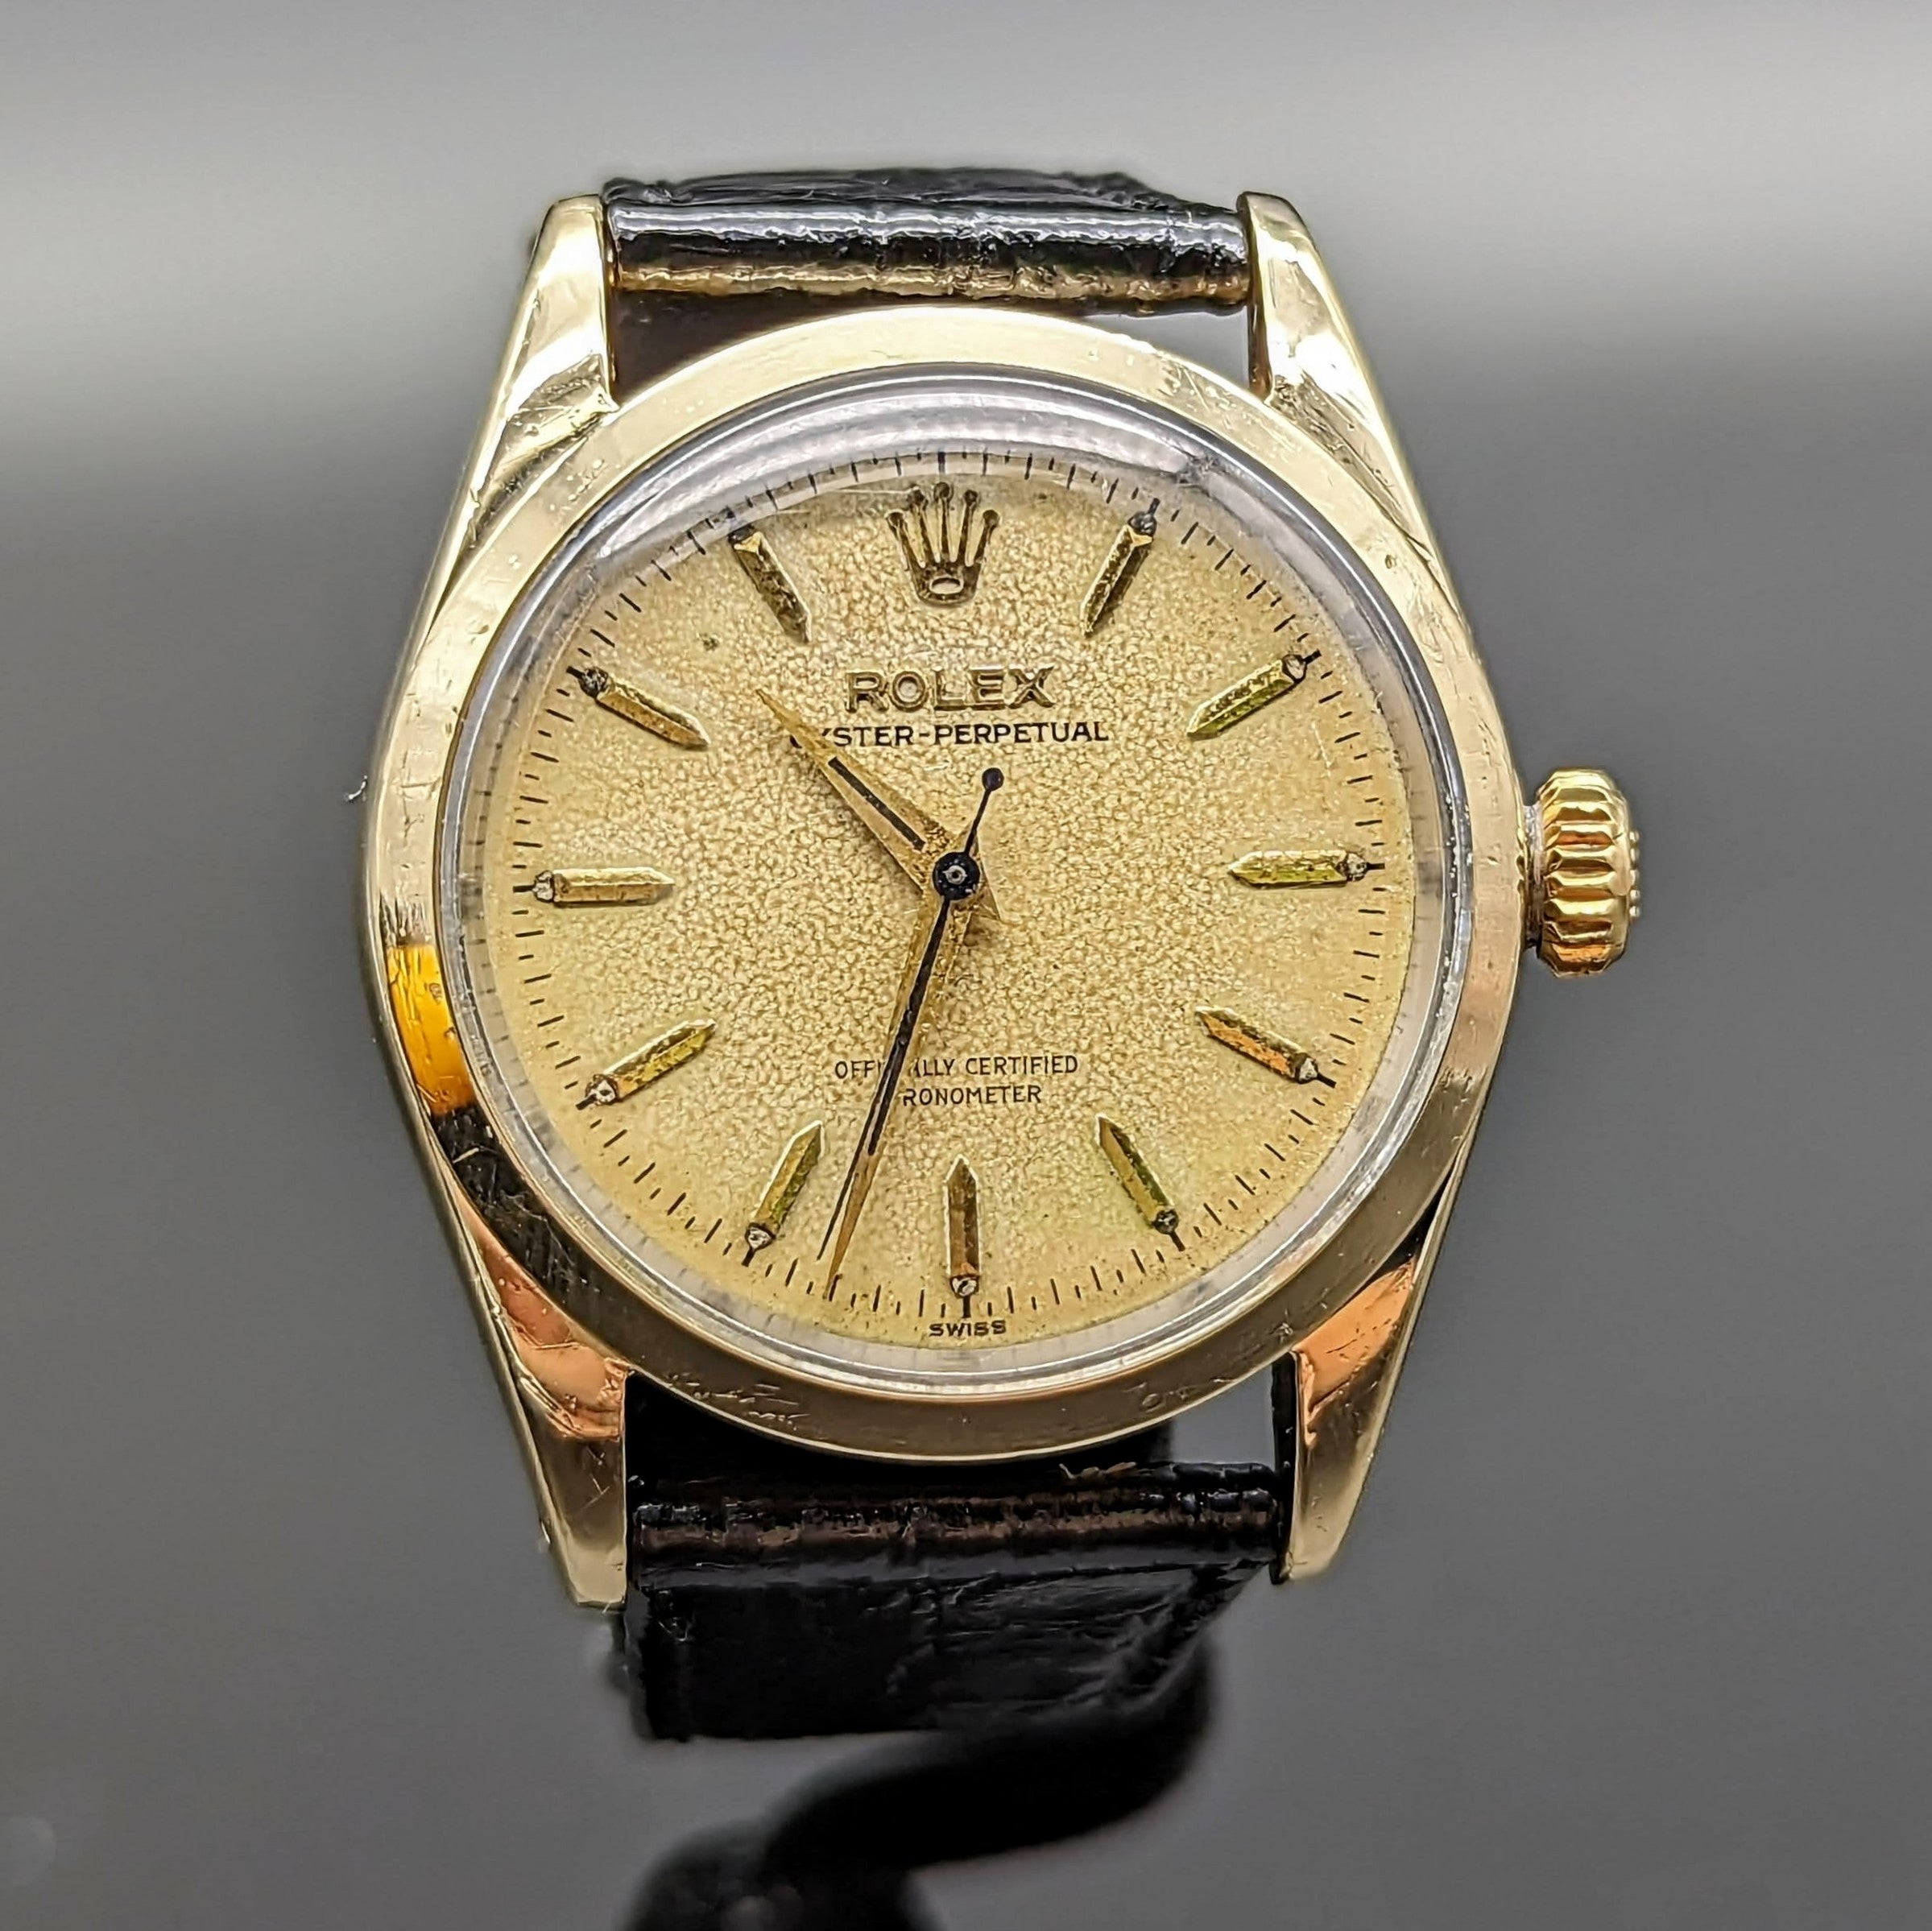 1957 ROLEX Oyster Perpetual Chronometer Automatic Wristwatch Ref. 6634 Vintage Watch